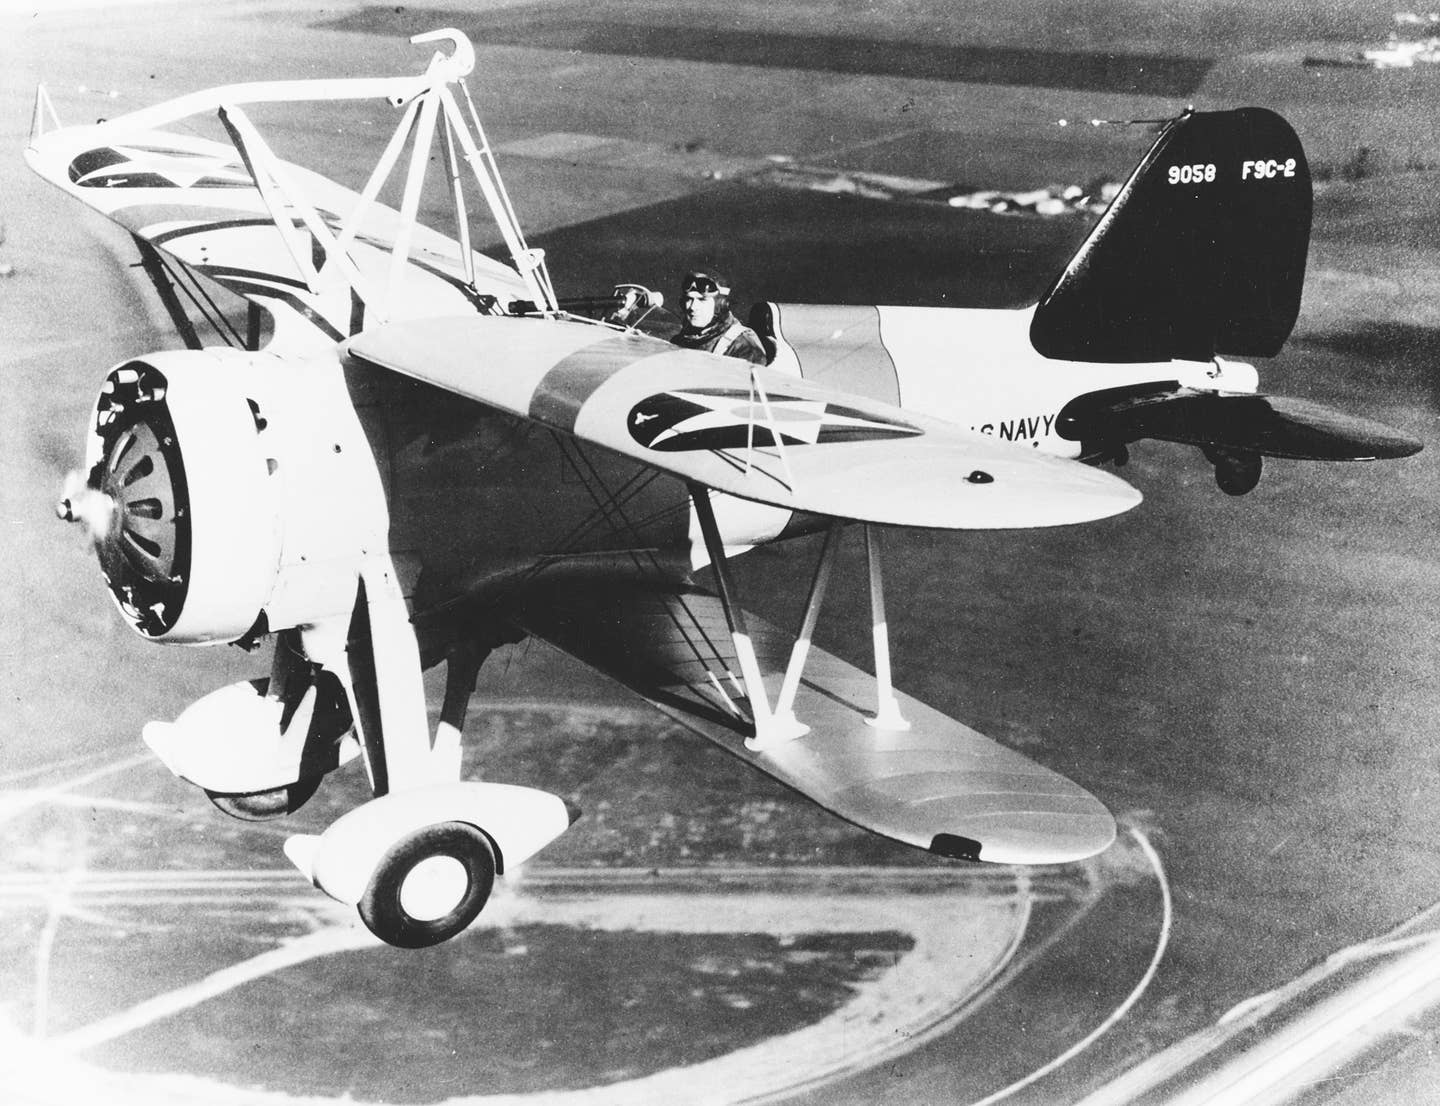 A Curtiss F9C-2 Sparrowhawk fighter, piloted by Lt. Harold B. Miller over Naval Air Station Moffett Field, California, in 1934. <em>U.S. Naval History and Heritage Command</em>